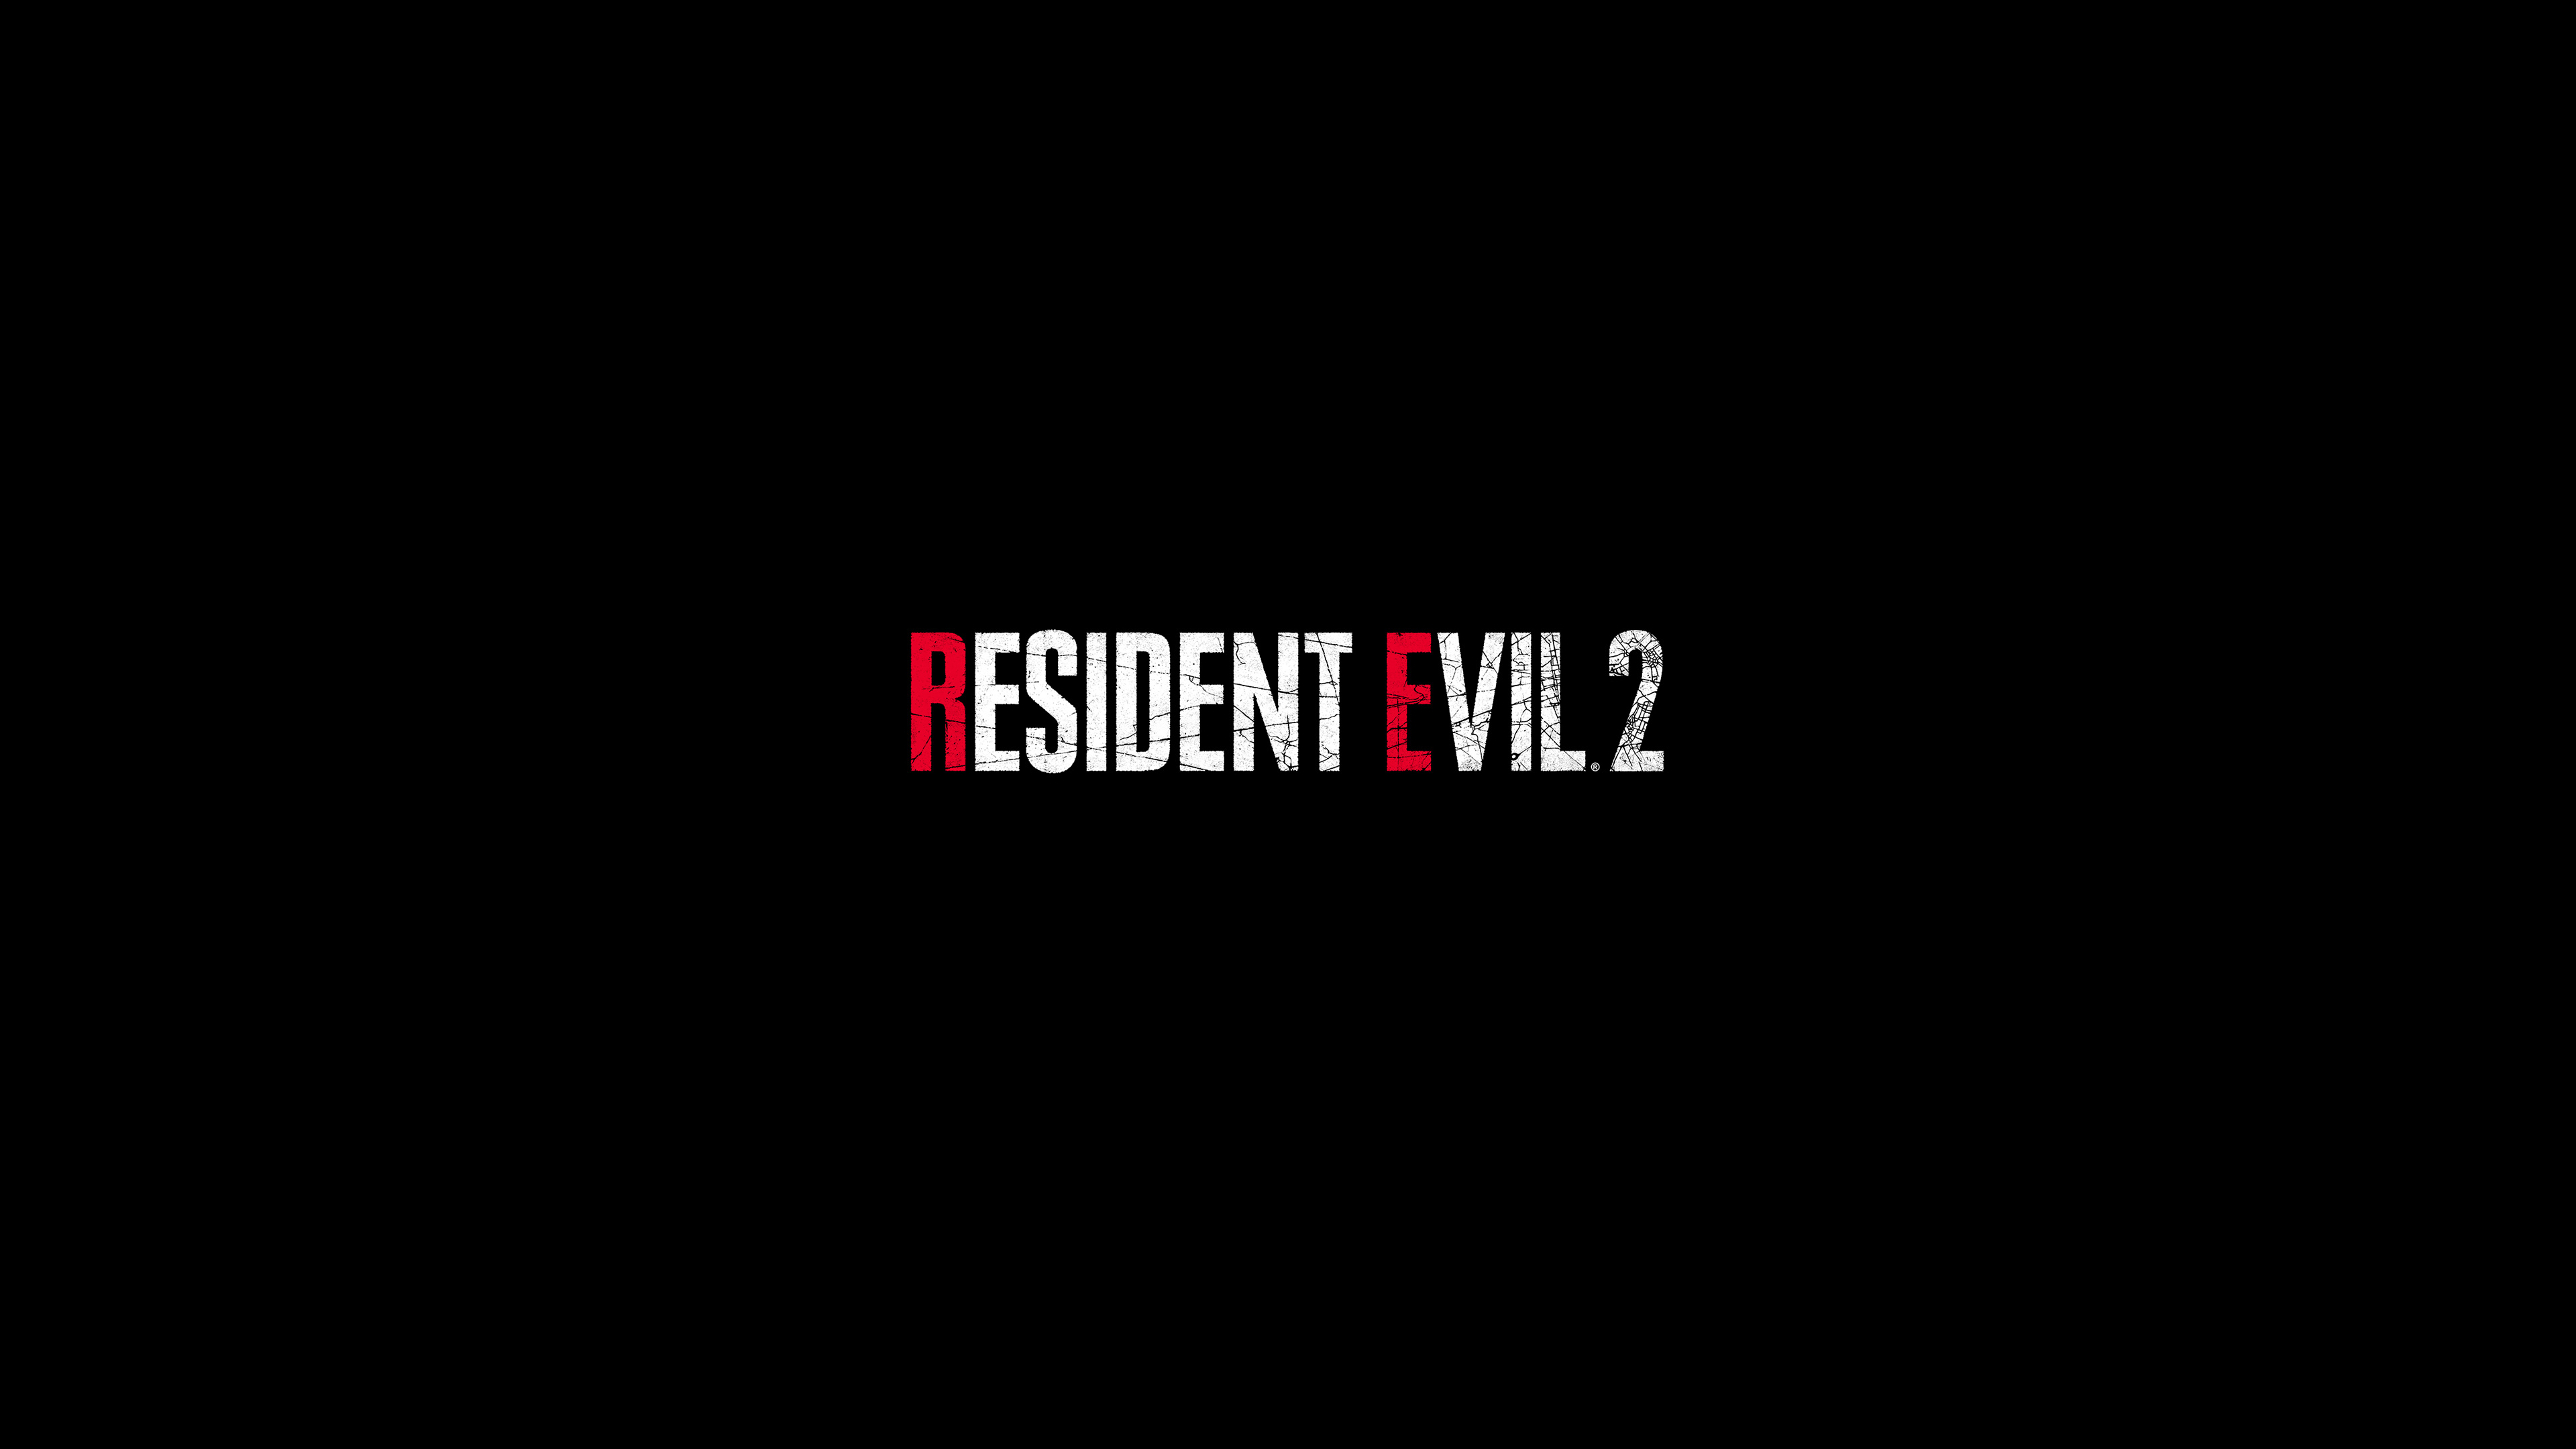 3840x2160 1920x1080 Resident Evil 2 Logo 4k Laptop Full HD 1080P HD 4k Wallpapers, Images, Backgrounds, Photos and Pictures